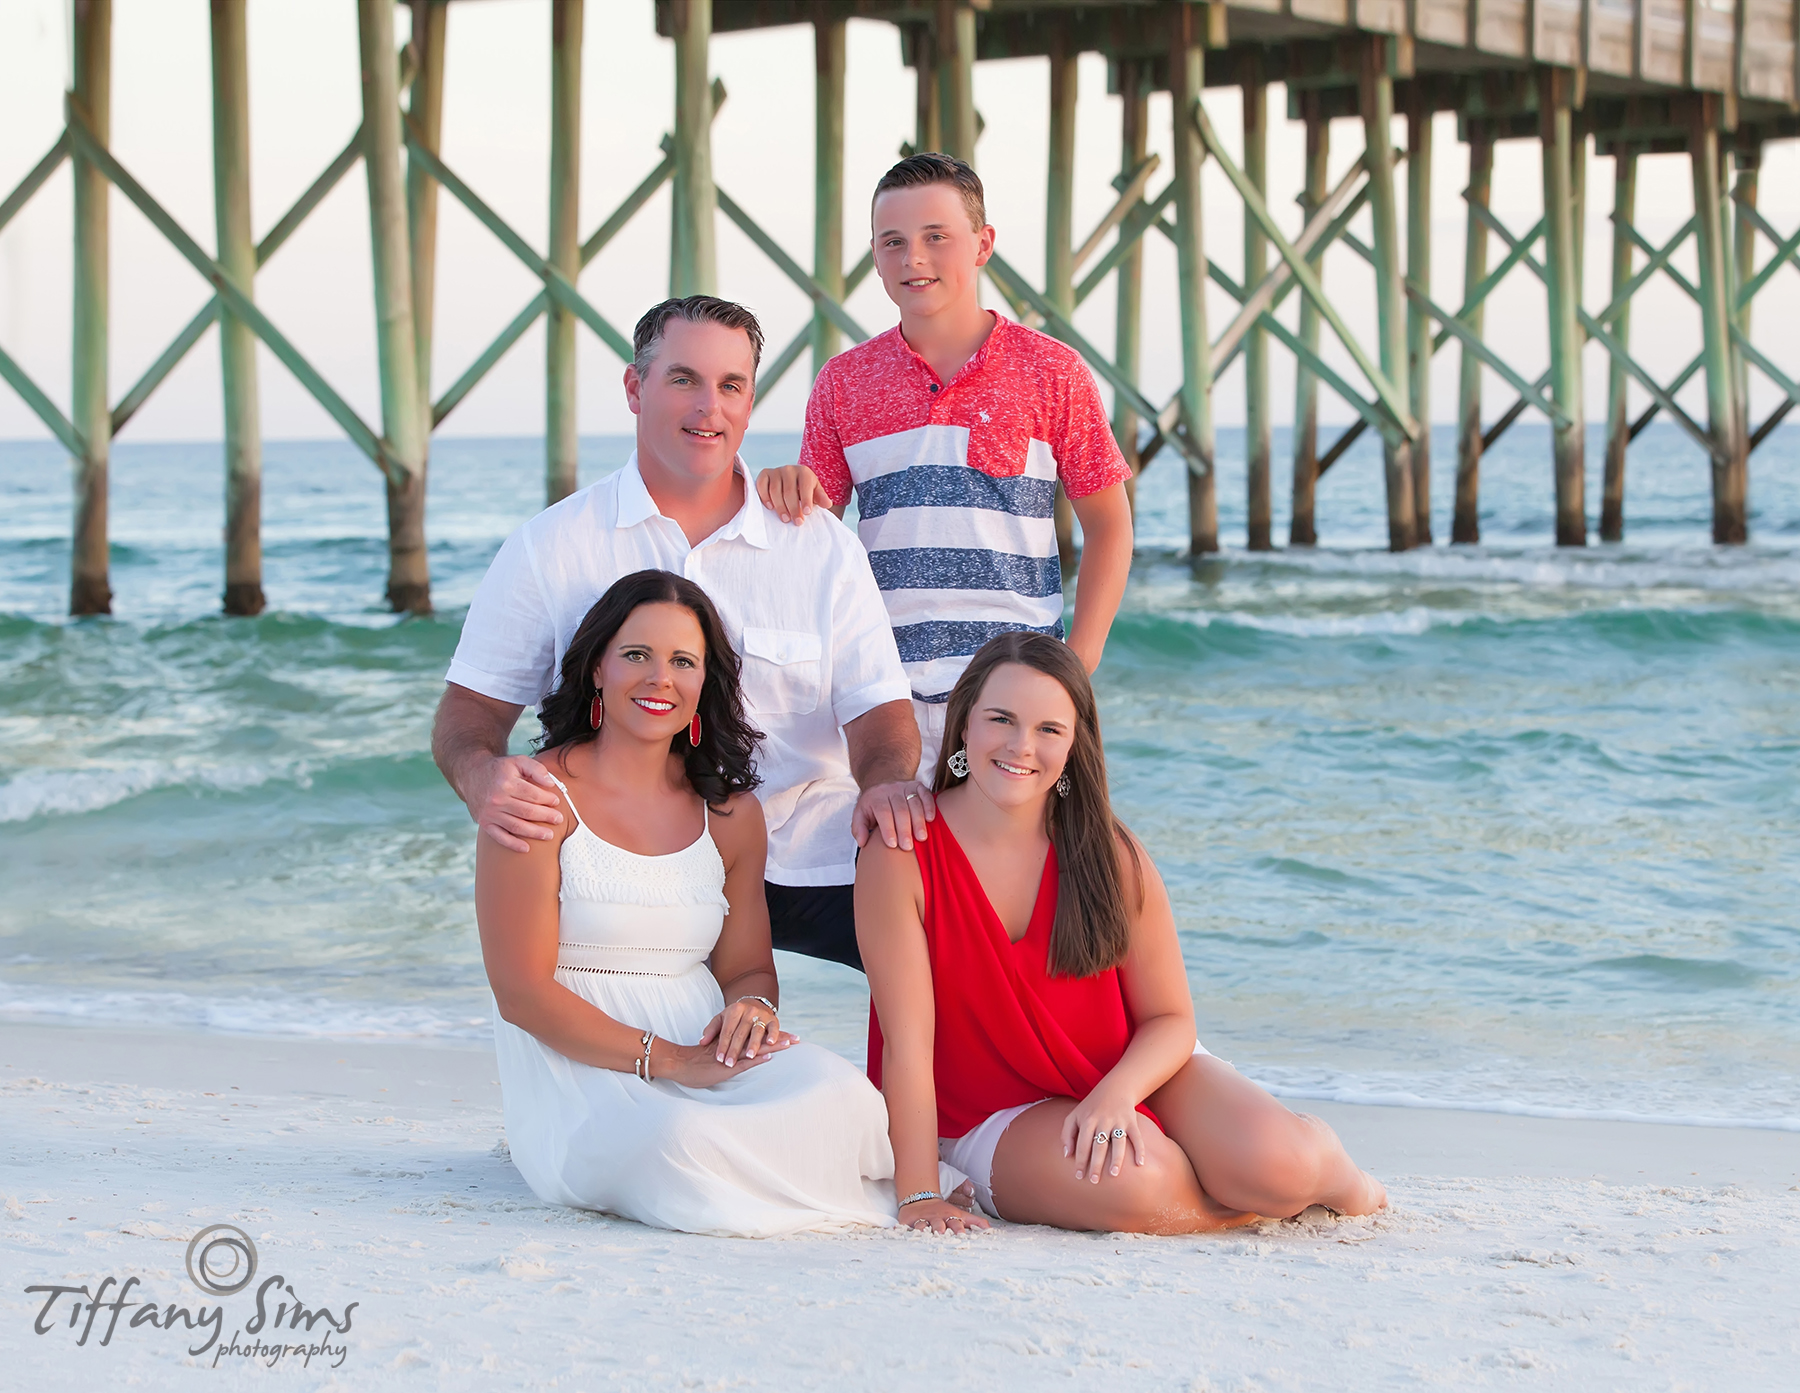 Destin Photography by Tiffany Sims Photography #destin #destinphotography #destinbeachphotography #30aphotography #30abeachphotography #destinphotographer #30aphotographer #fortwaltonbeachphotography #okaloosaislandphotography | RC59rw